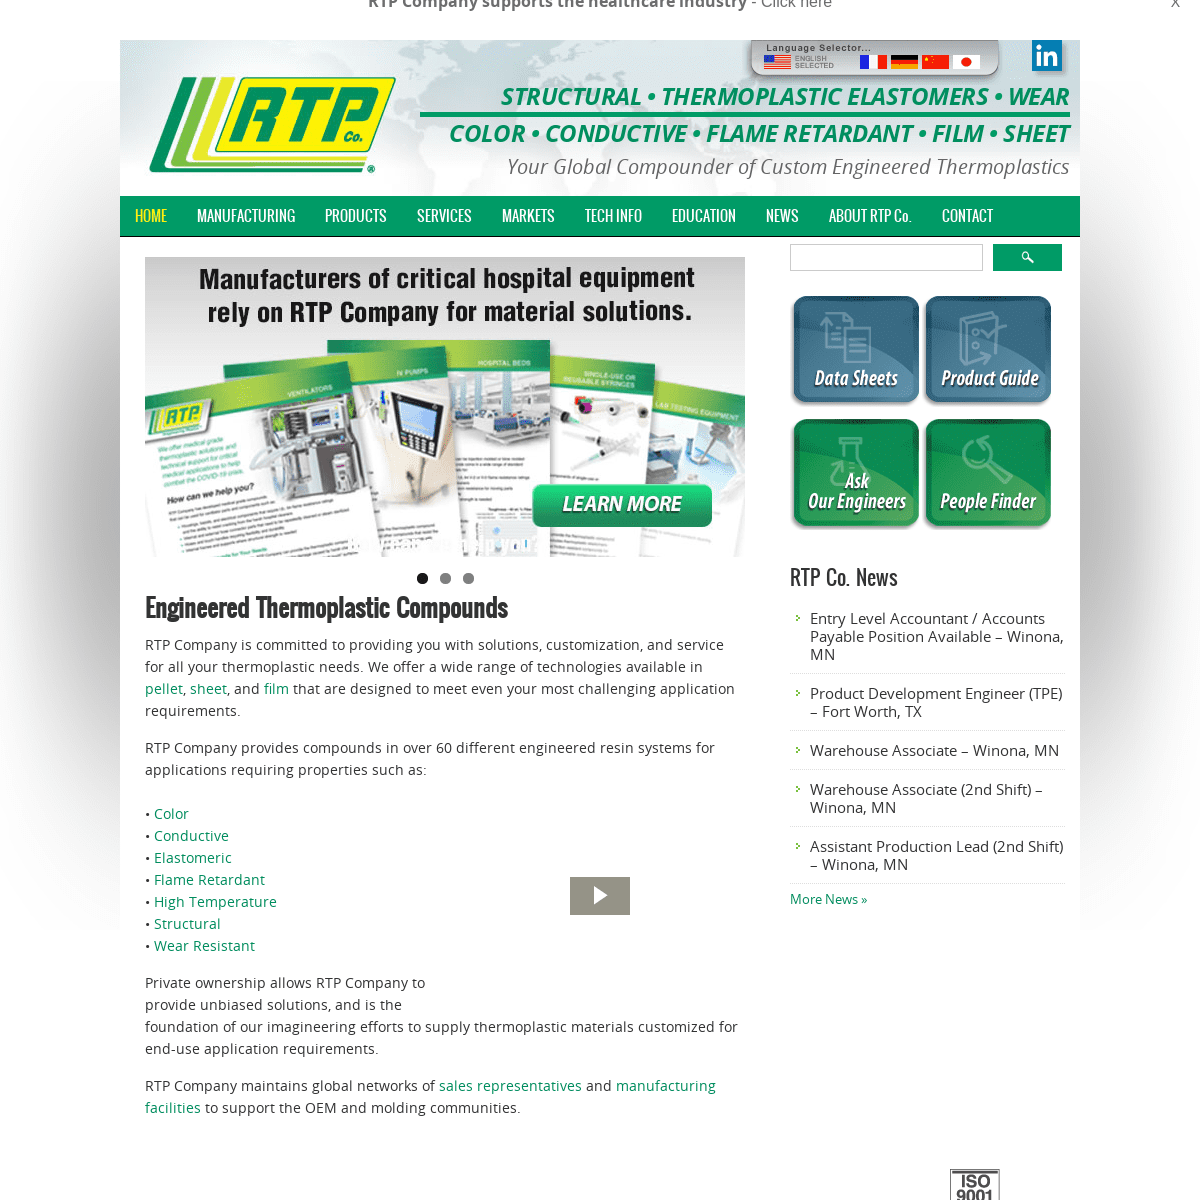 A complete backup of https://rtpcompany.com